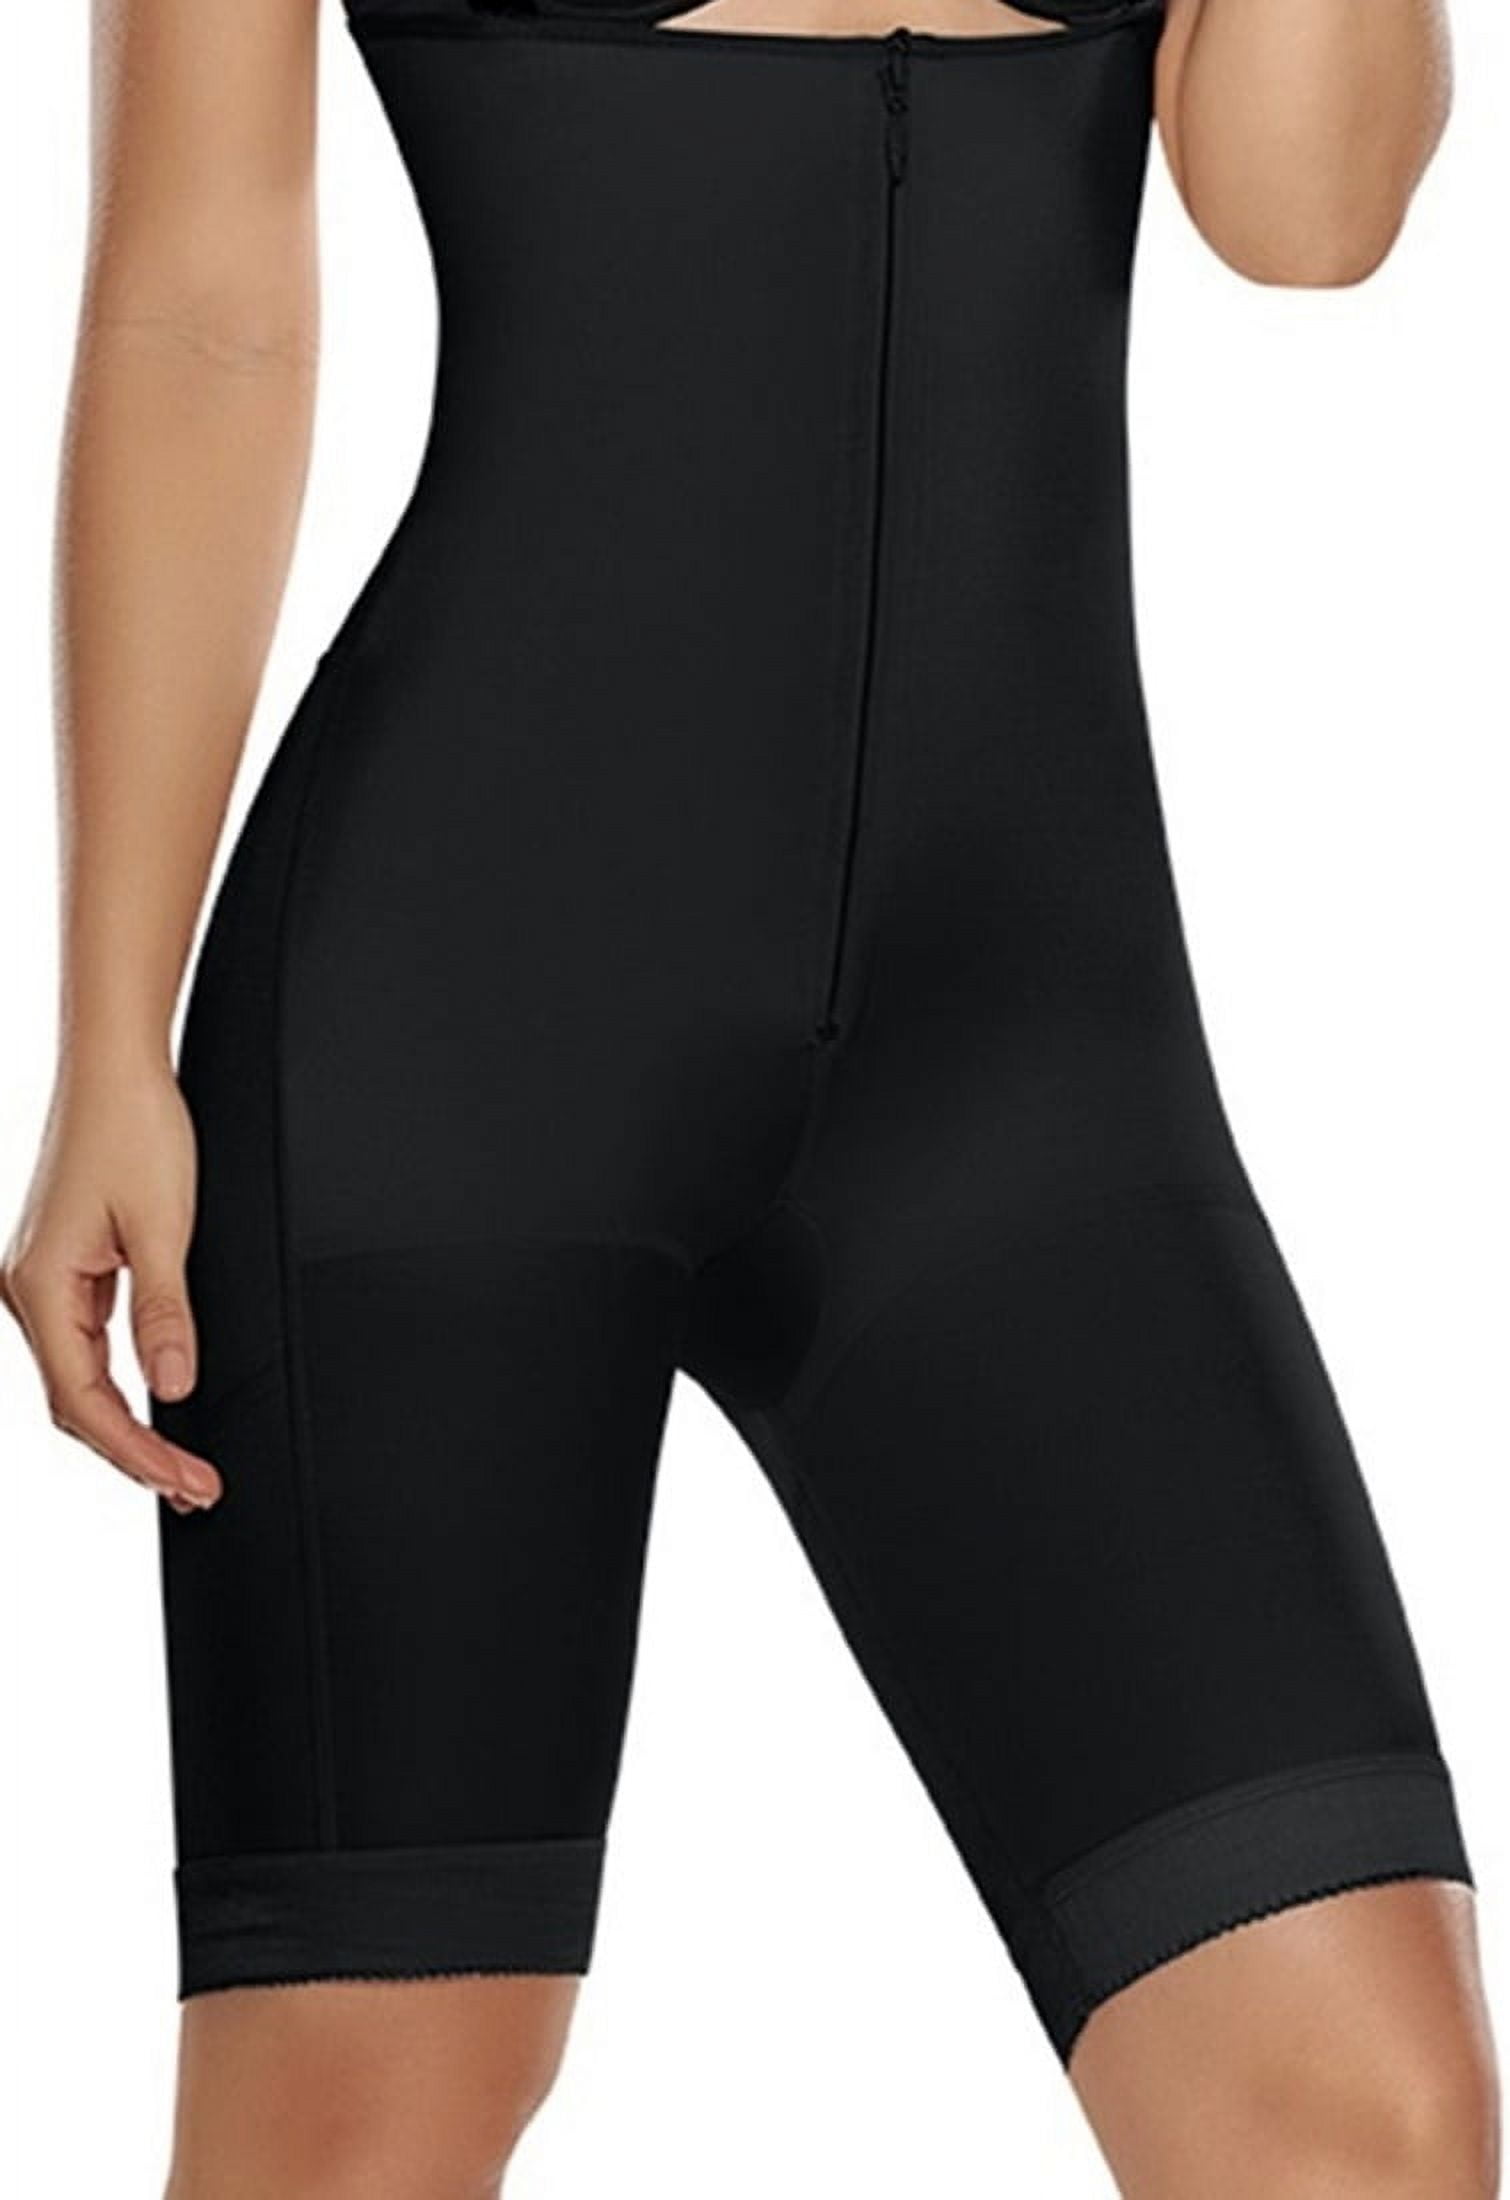 Shapewear & Fajas The Best Faja Fresh and Light-Body Shaper Bodysuit for  women Shapewear made with high compression fabric. Burn fat and water